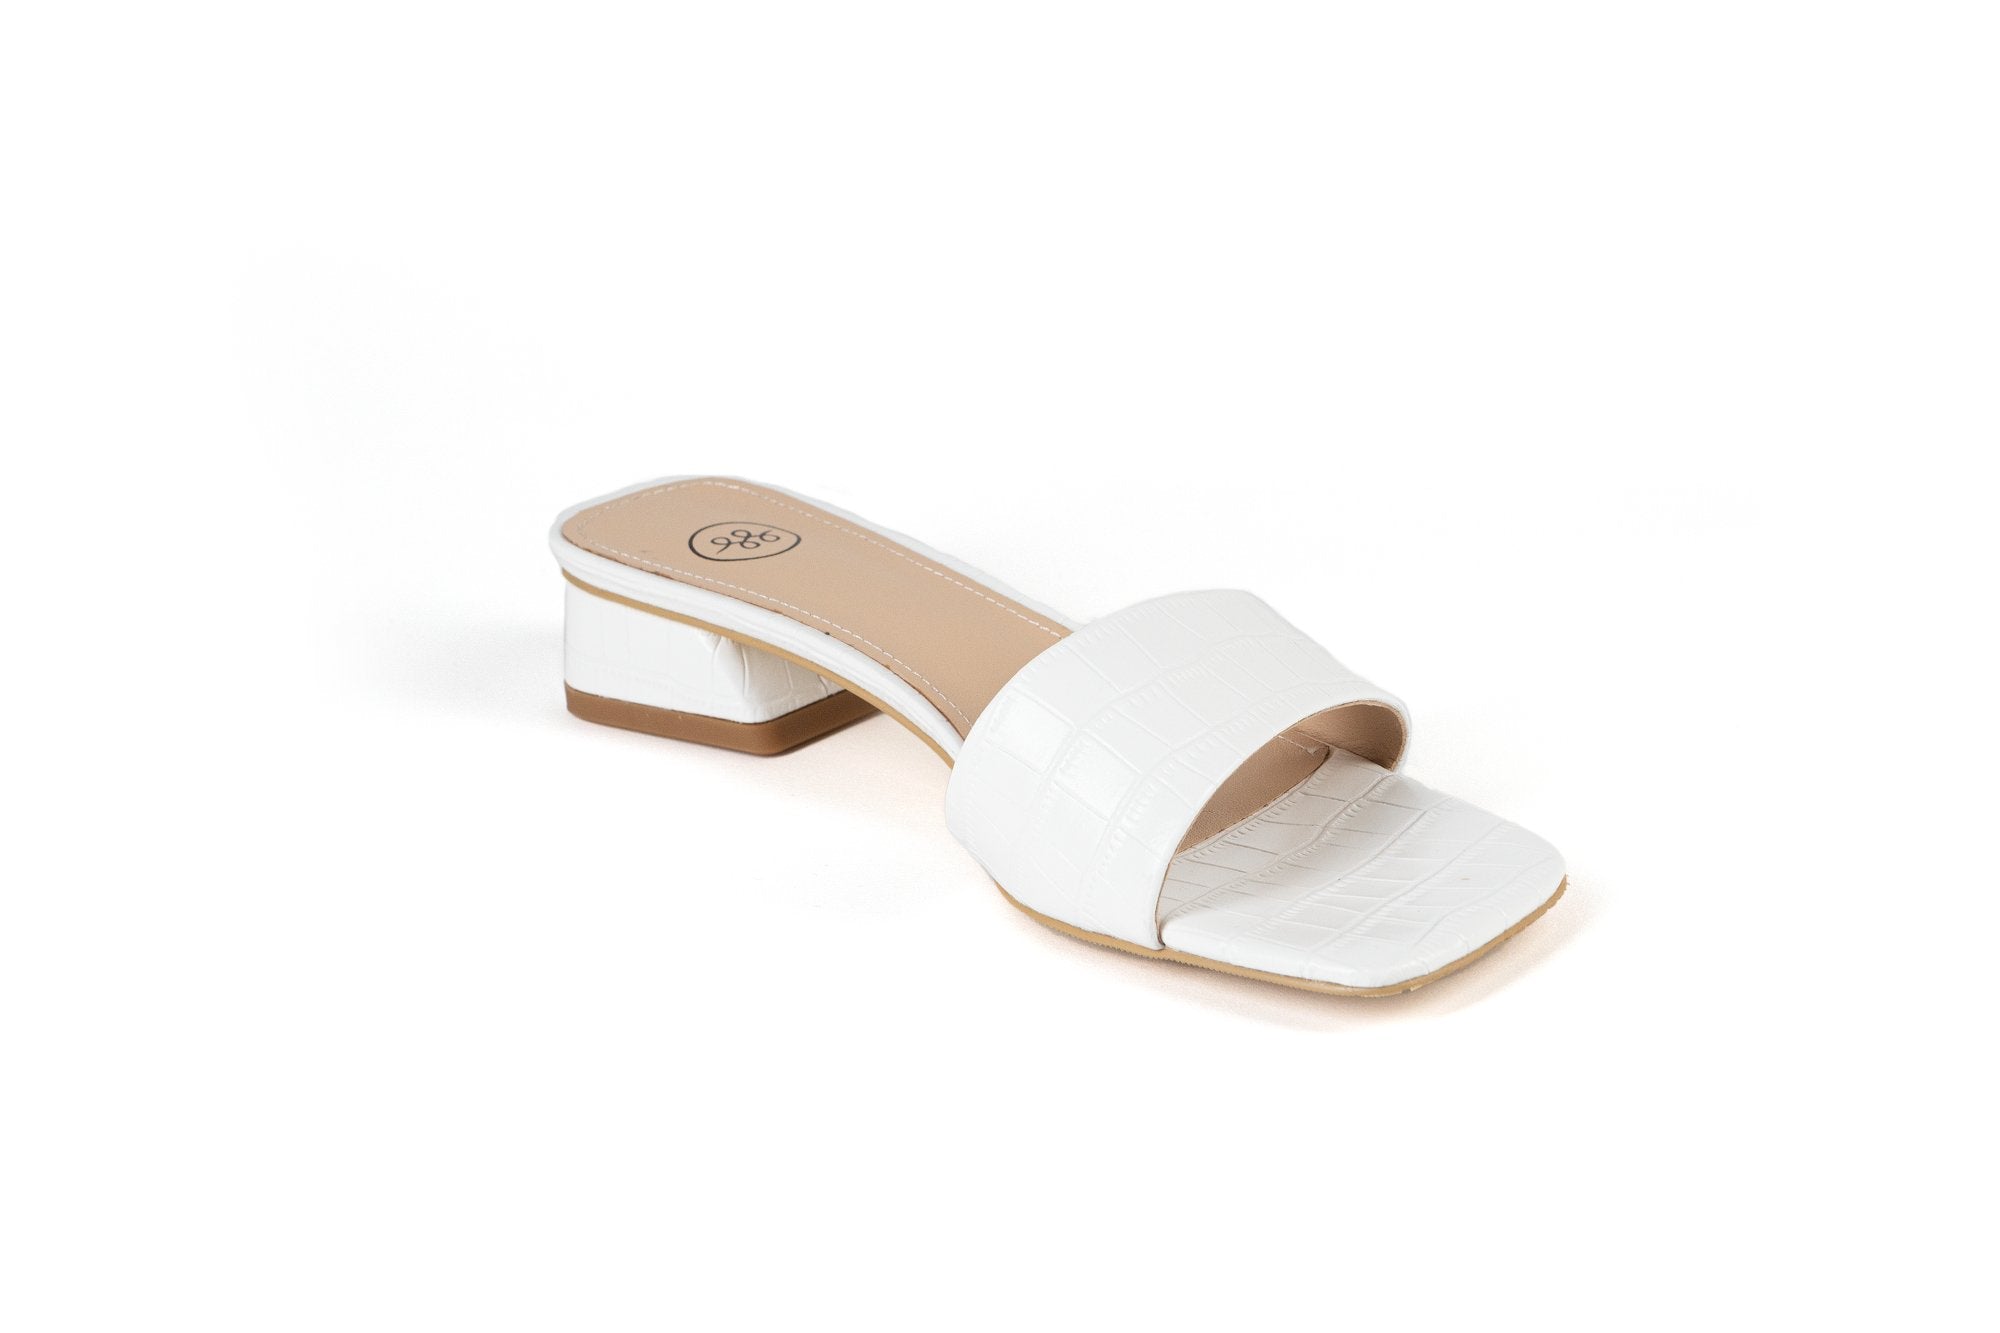 Marbella Sandal White Flats by Sole Shoes NZ F18-36